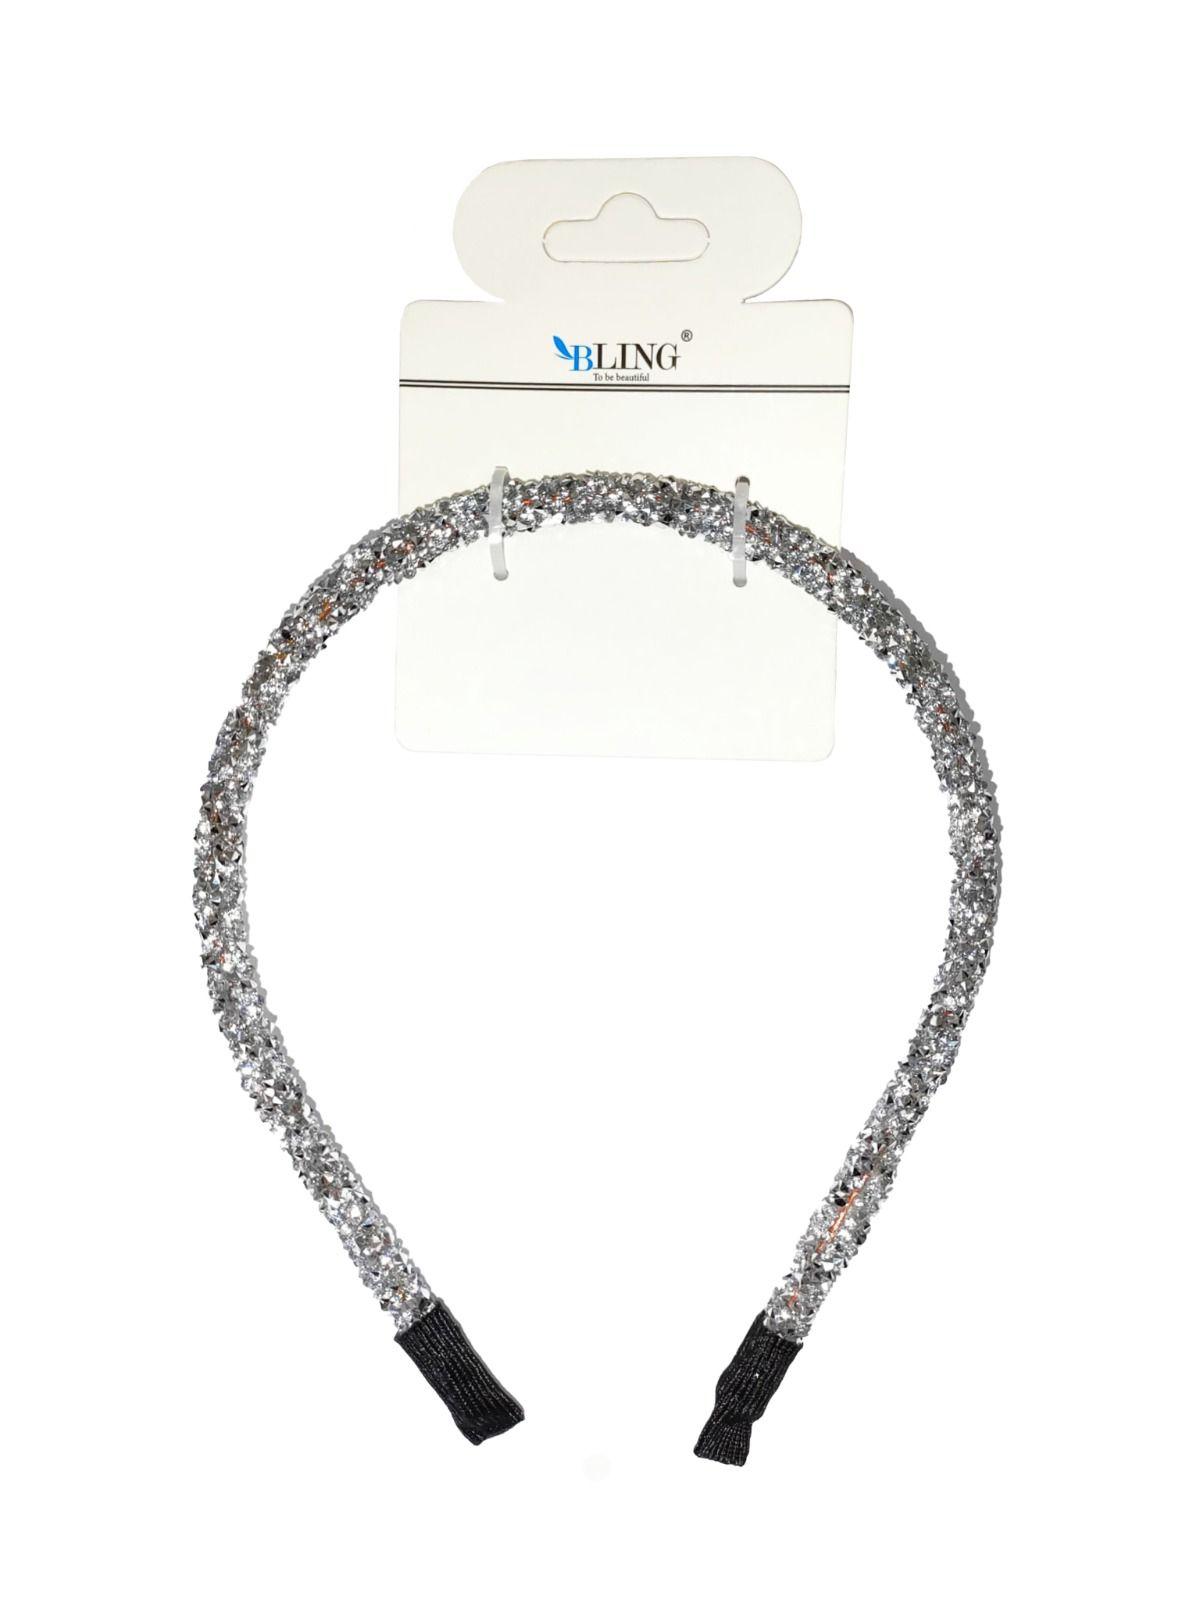 BLING hairband with dewlap crystals - silver